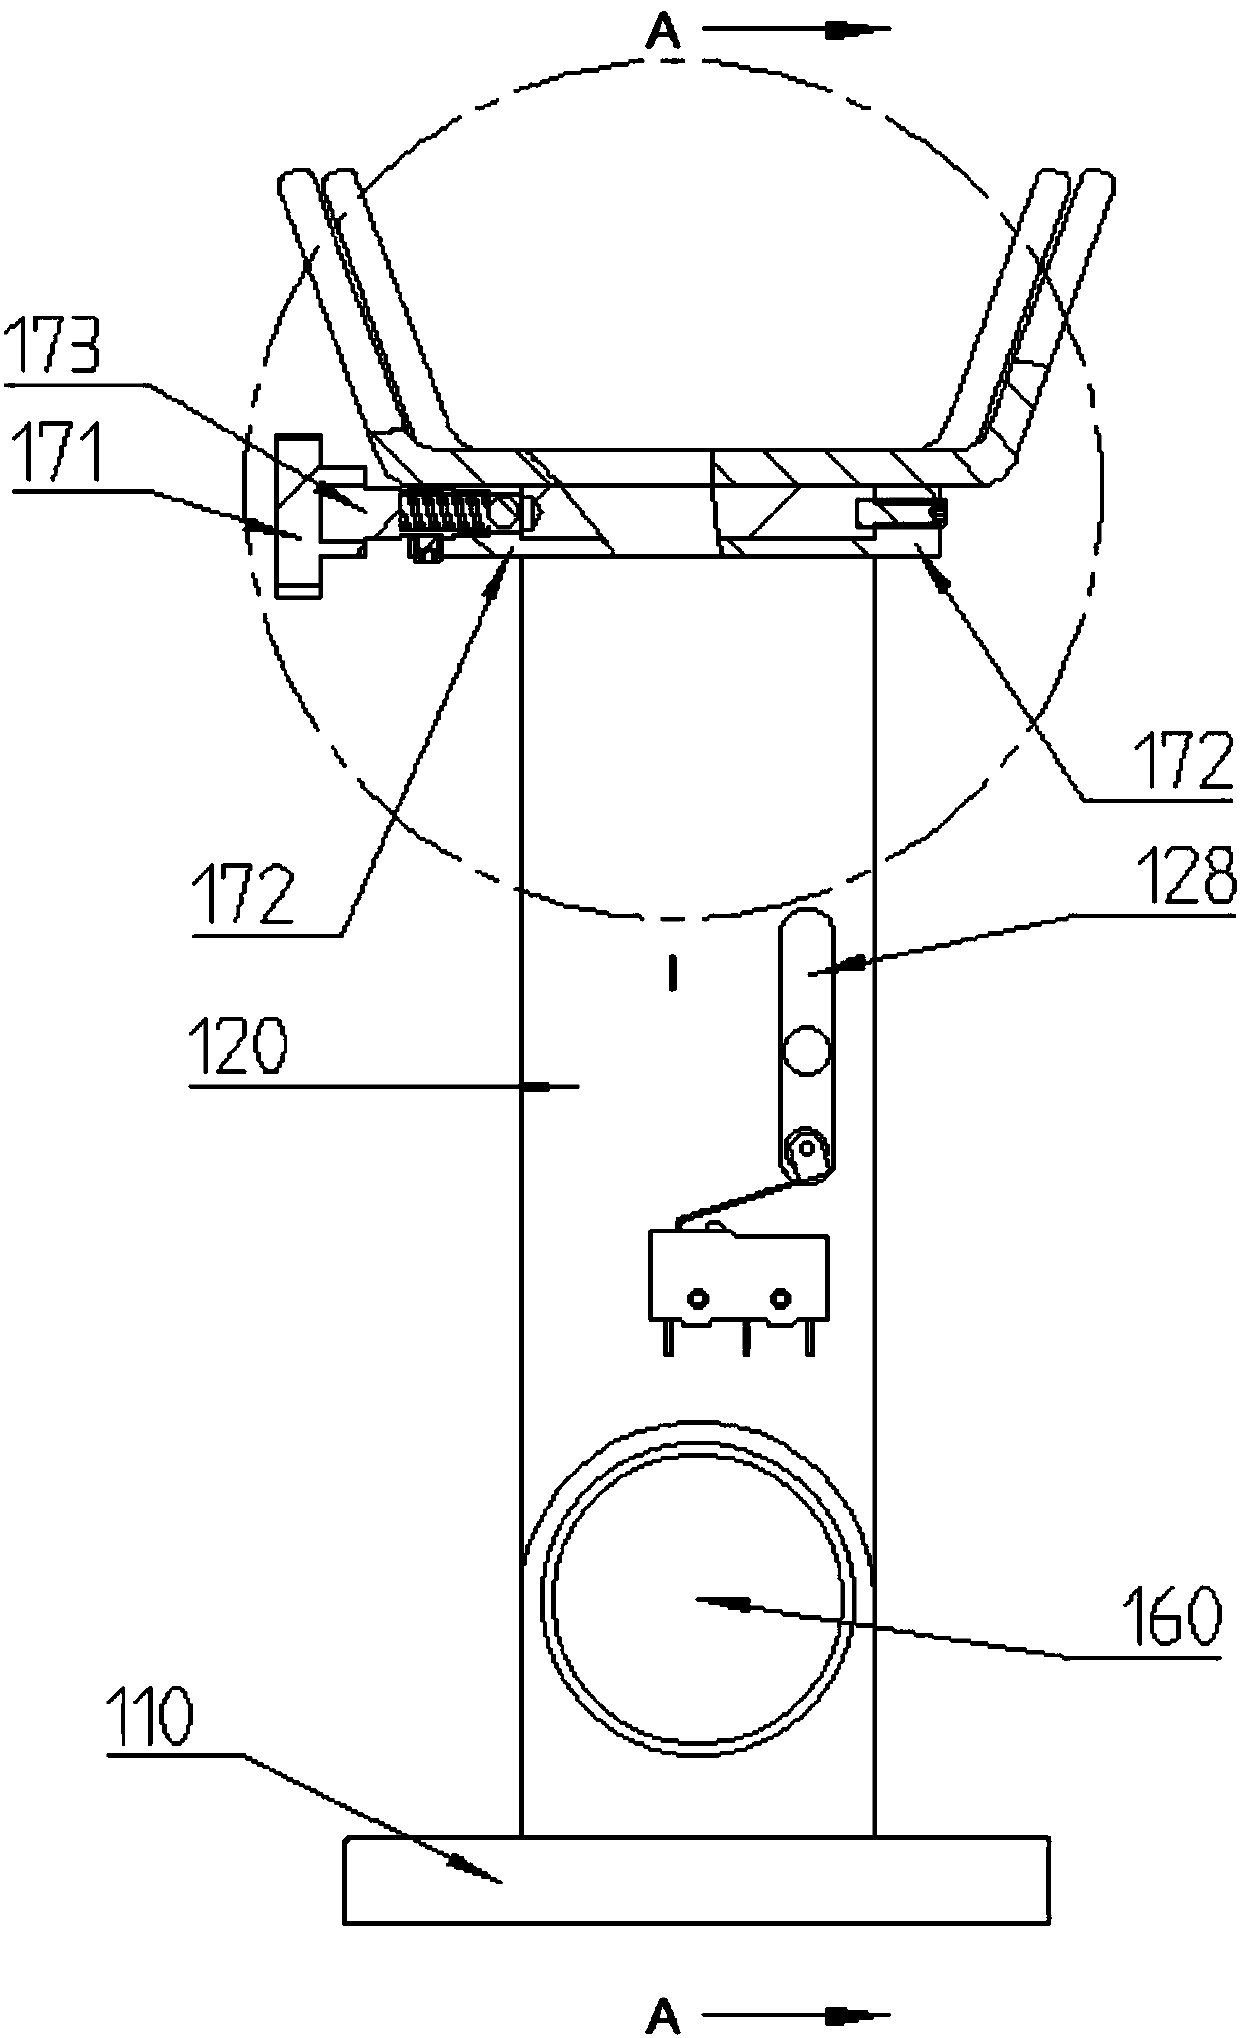 Arm supporting mechanism of hand wrist joint rehabilitation training device